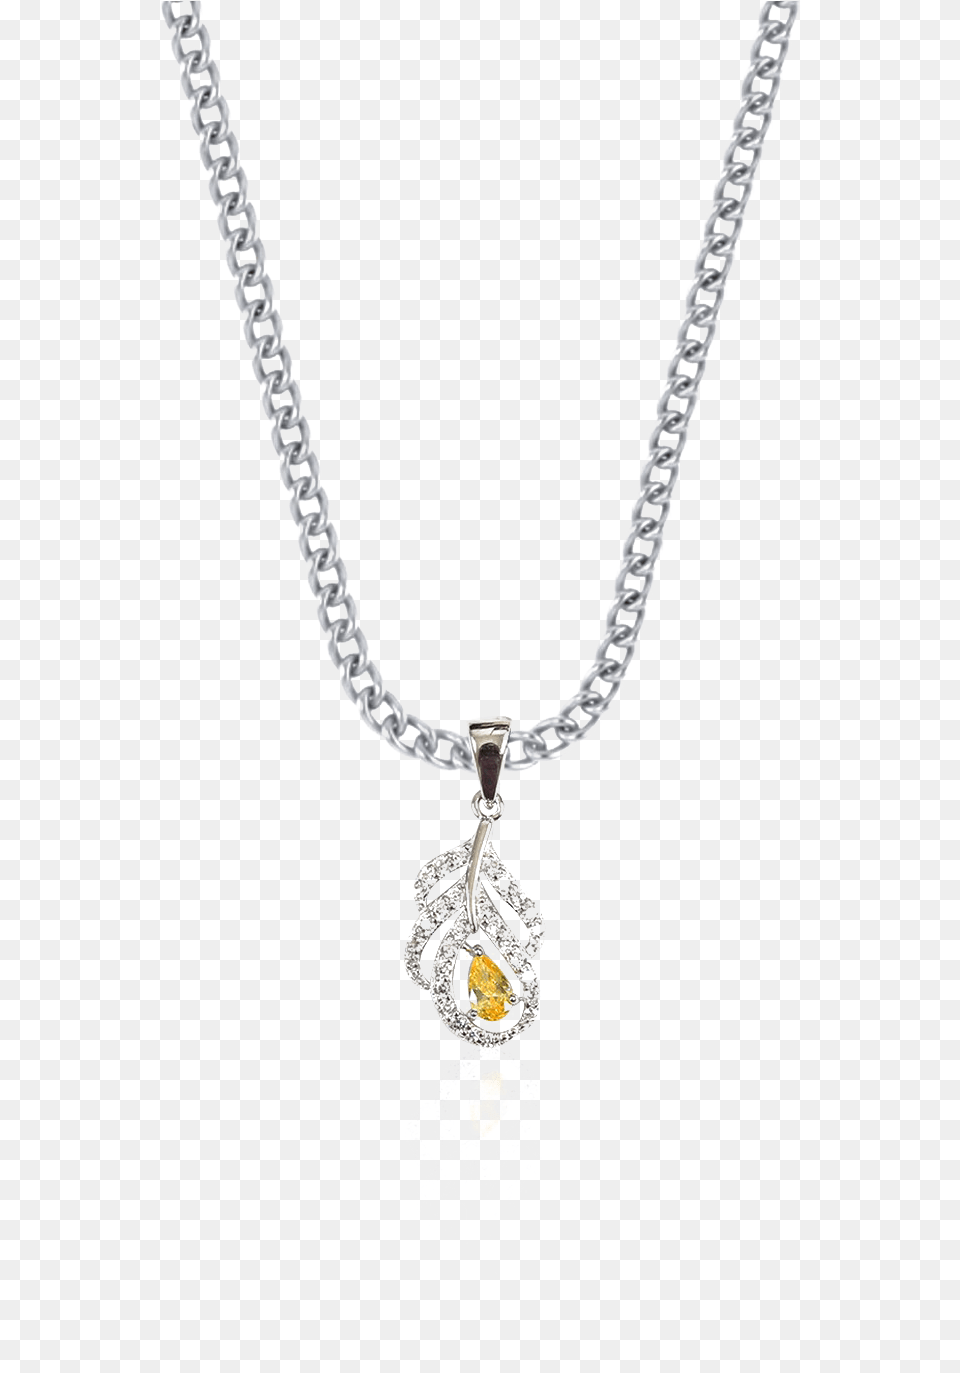 Silver Pendant, Accessories, Jewelry, Necklace, Diamond Free Transparent Png